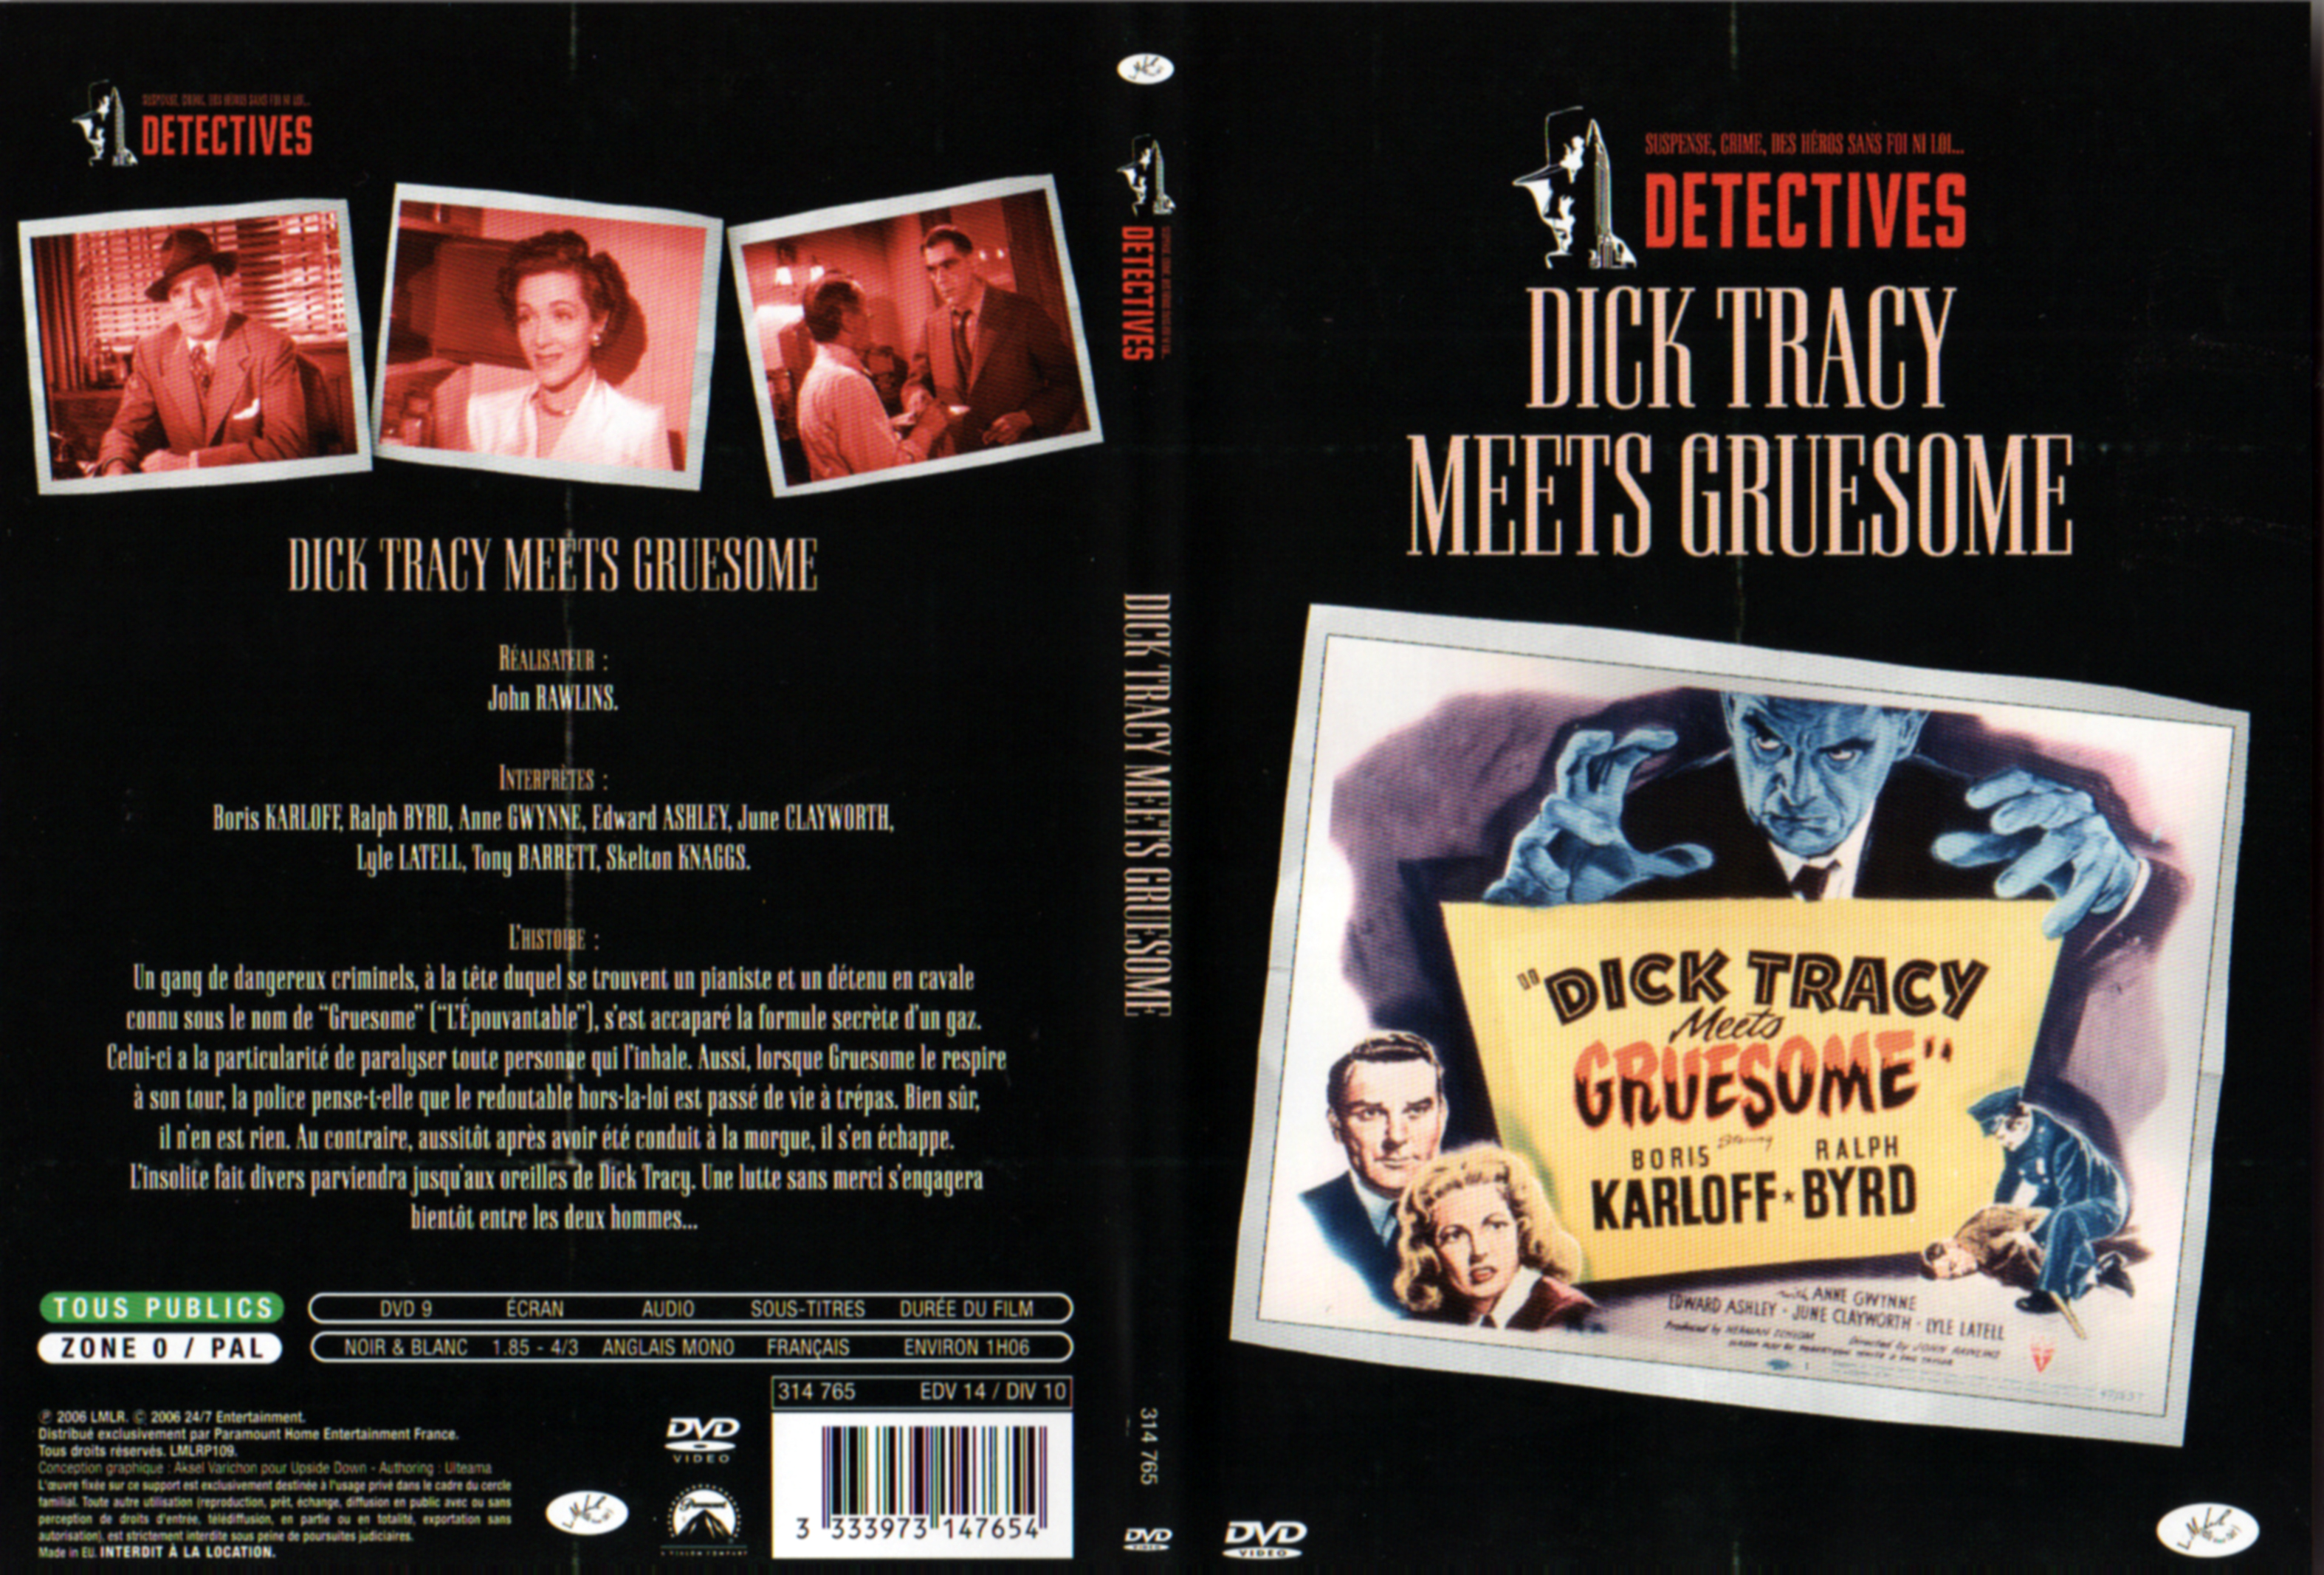 Jaquette DVD Dick Tracy meets Gruesome